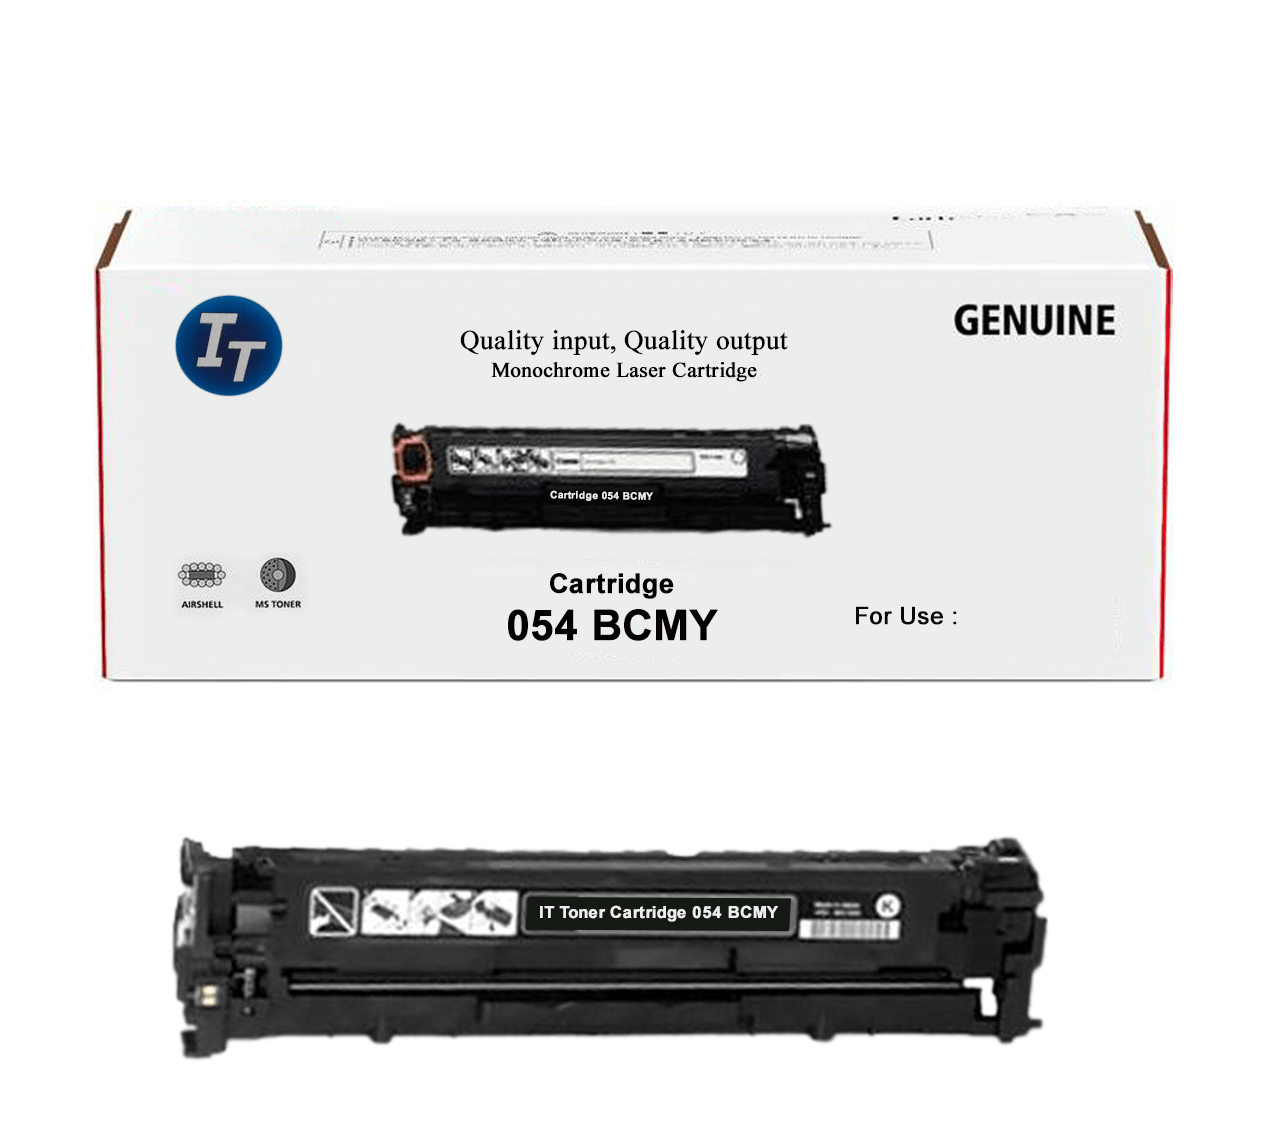 IT Toner Cartridge Canon 054 BCMY (7).png